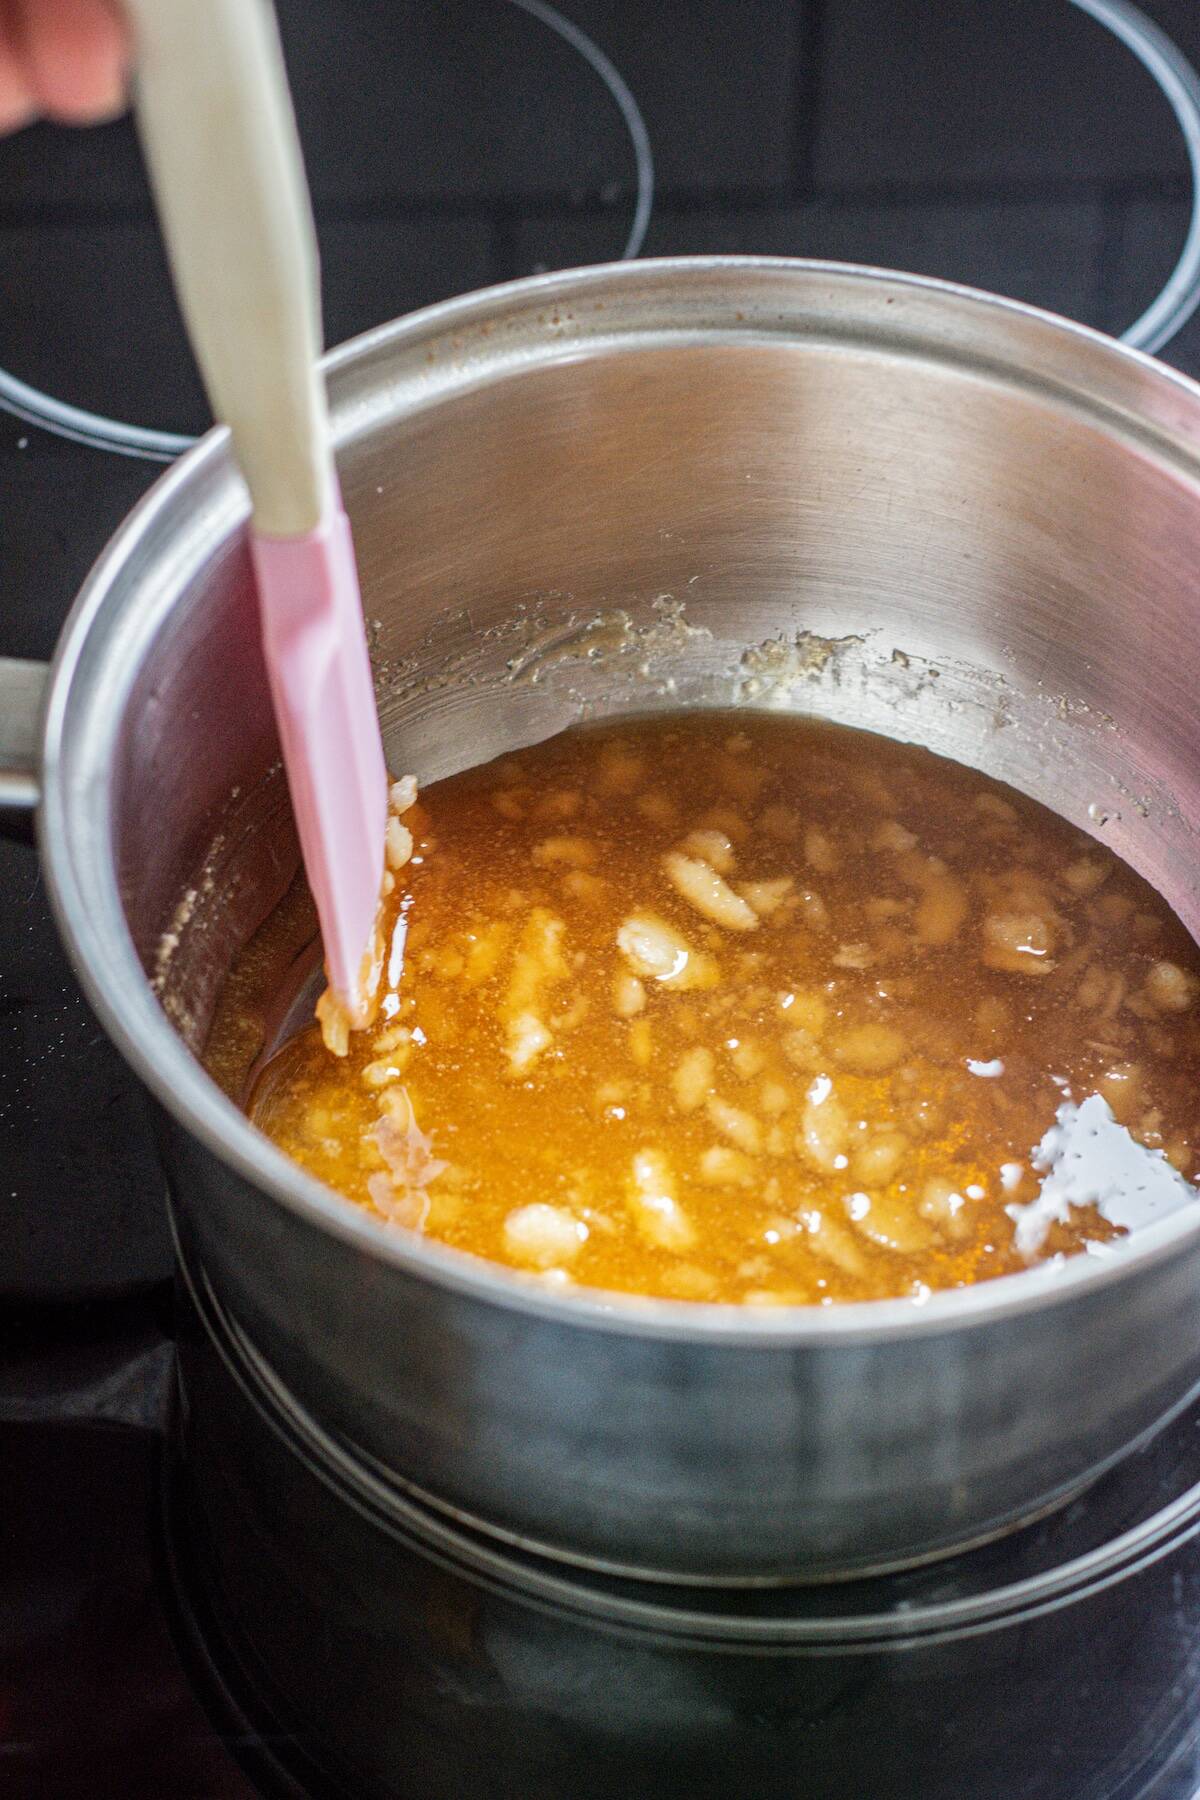 dry caramel being made.